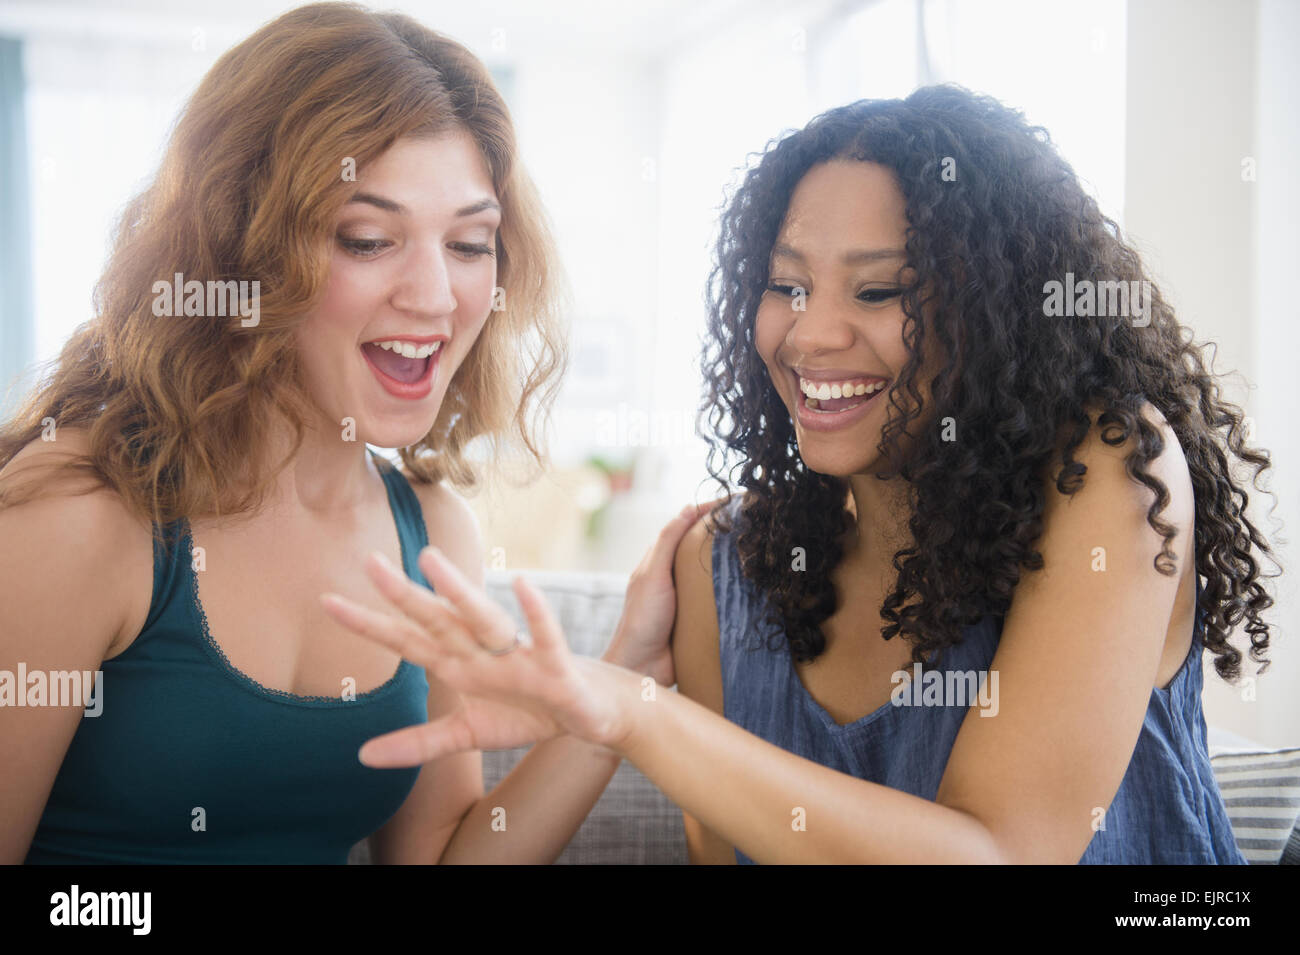 Woman admiring engagement ring of friend Stock Photo